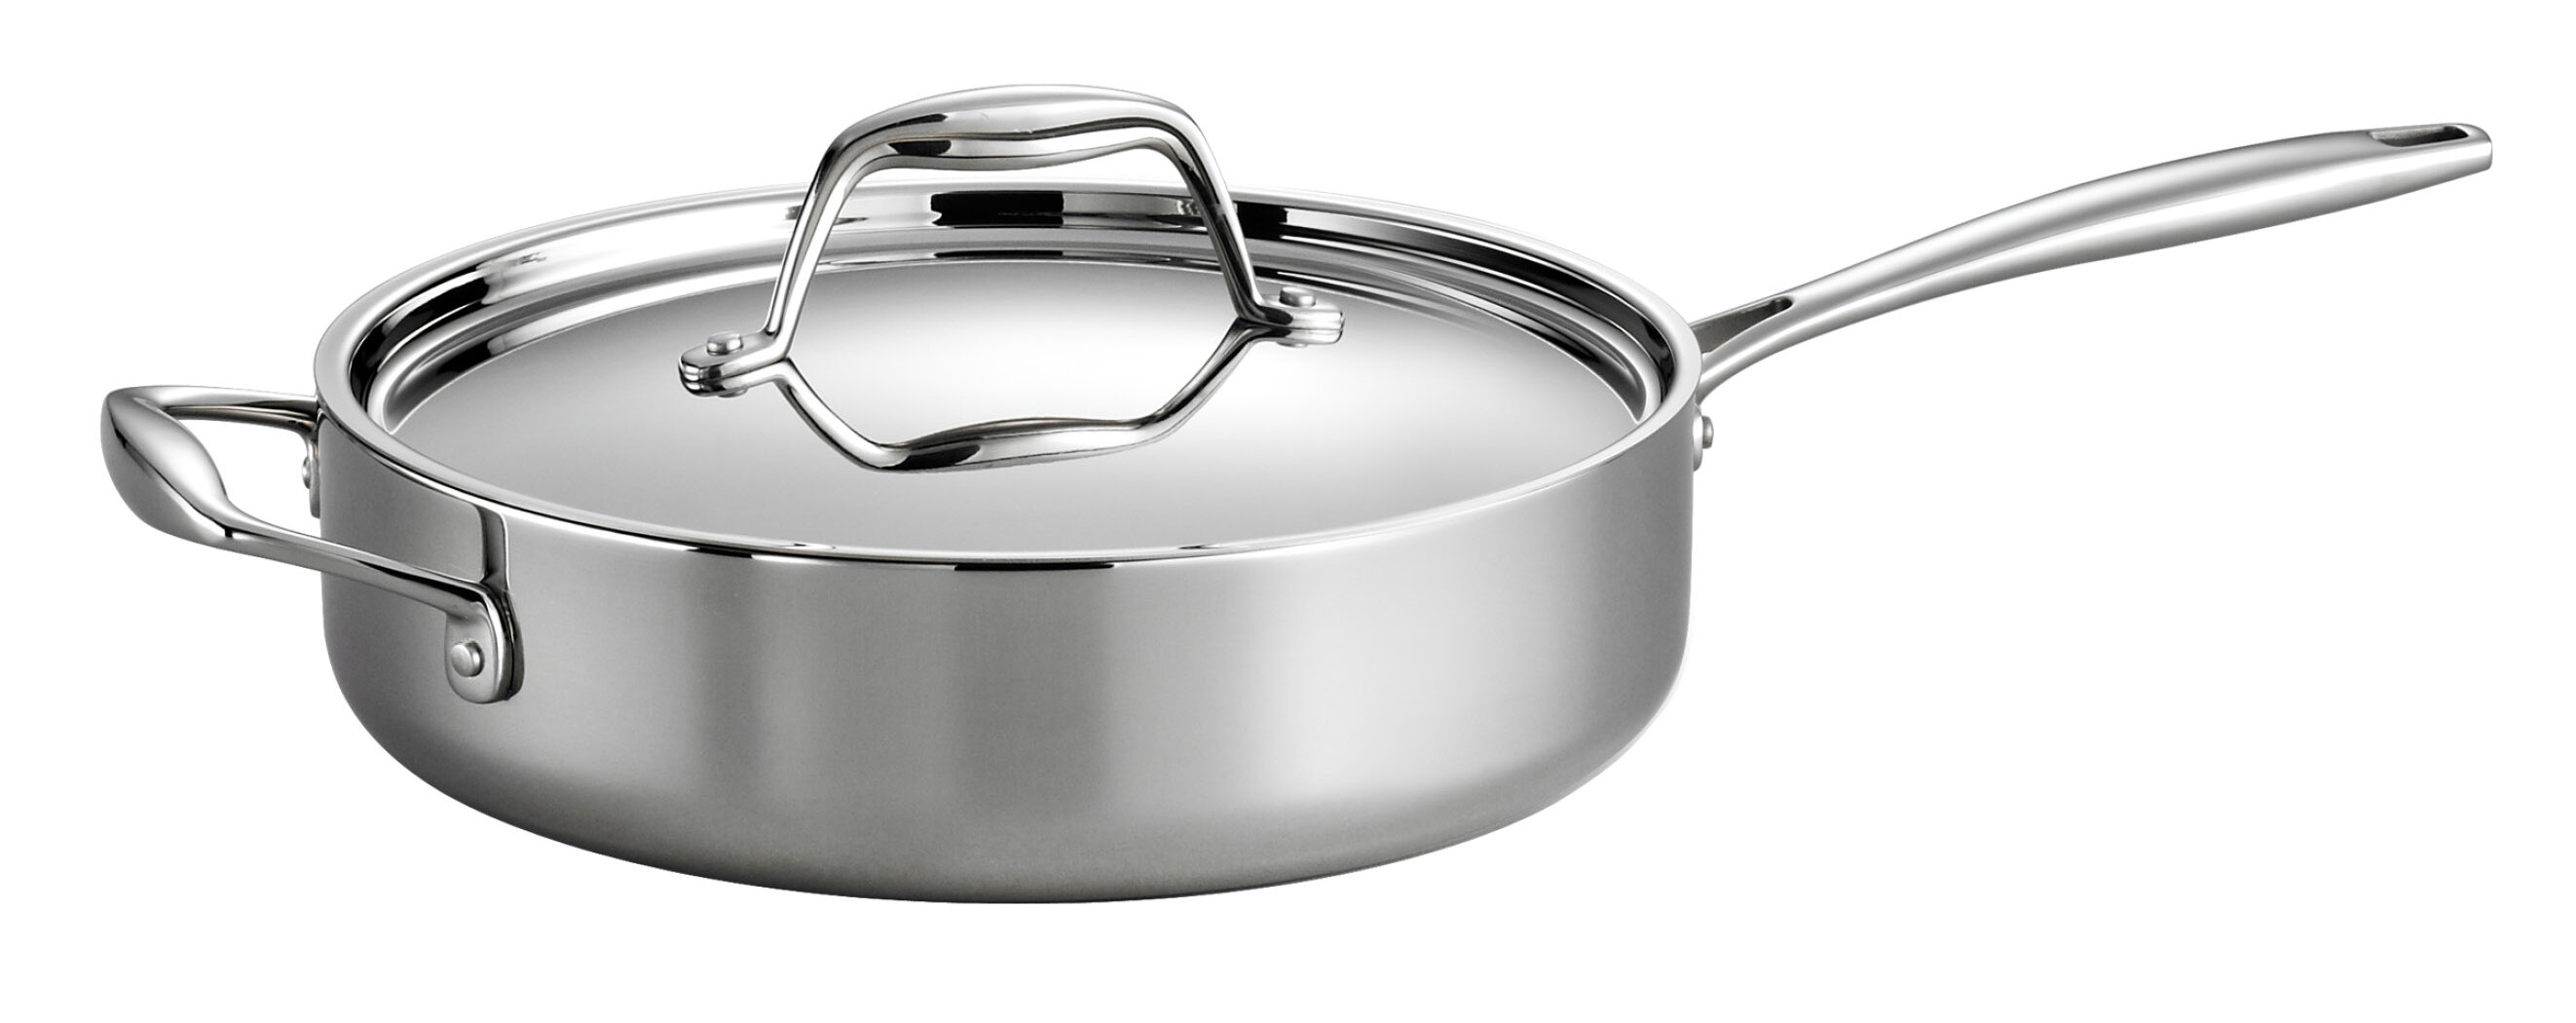 Calphalon Tri-Ply Stainless Steel 3-Quart Saute Pan with Cover